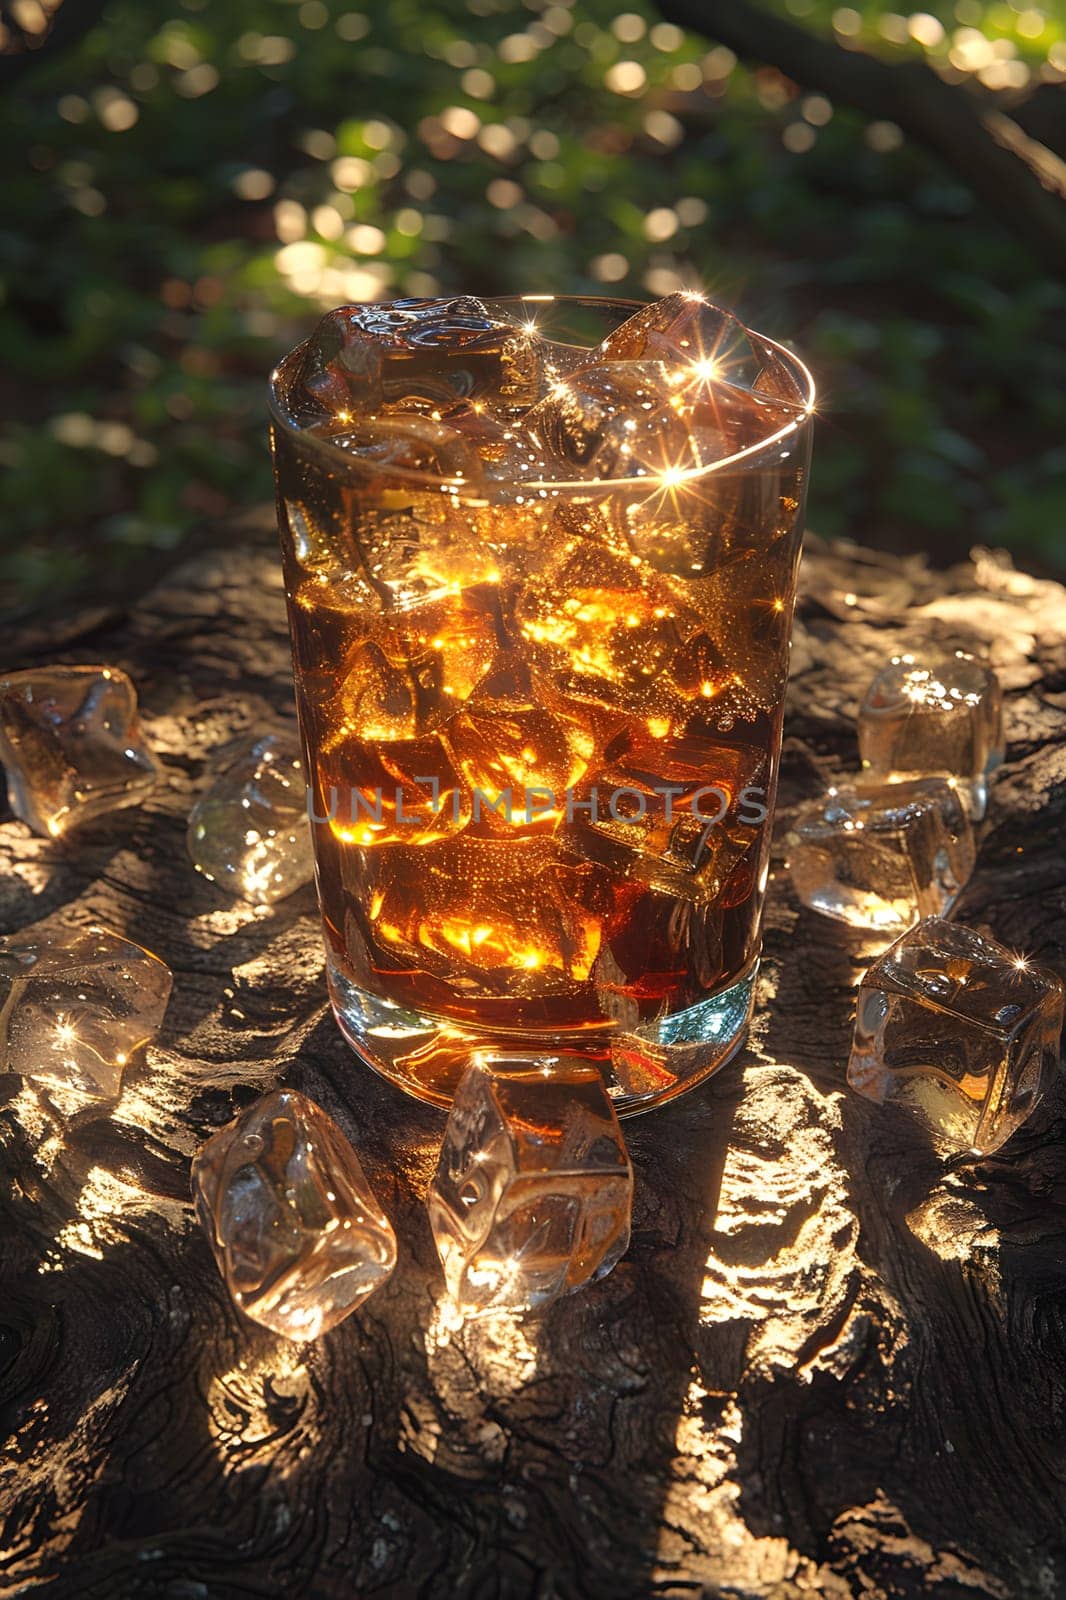 A drink featuring Tennessee whiskey or cognac, such as a Rusty Nail cocktail, served in a glass with ice cubes on a wooden table